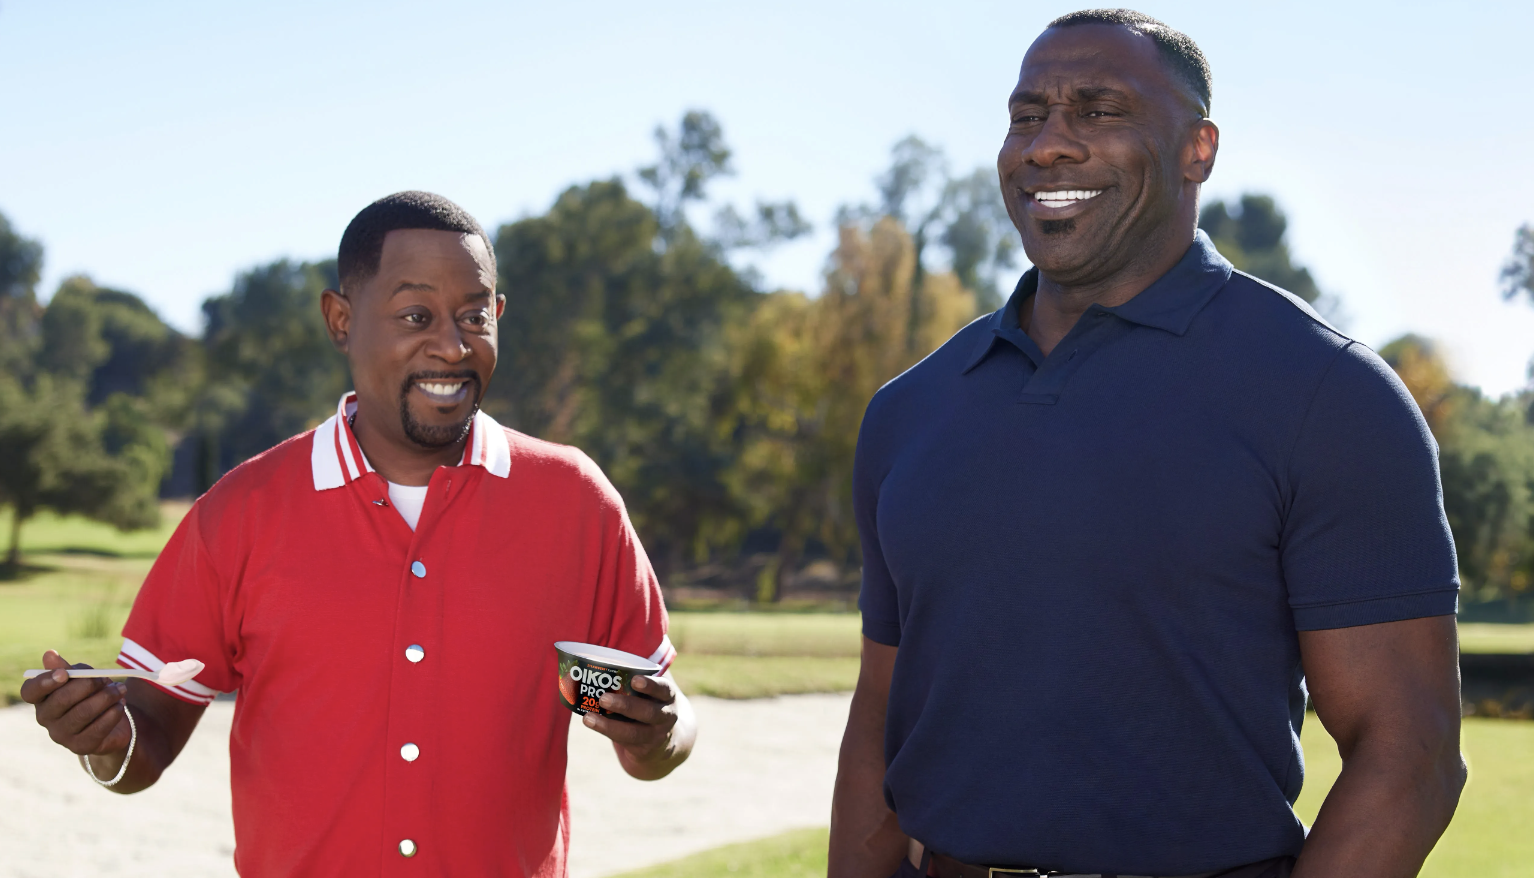 Shannon Sharpe On Working With Martin Lawrence And Flexing His Funny Bone In New Super Bowl Ad: ‘We Had A Blast’